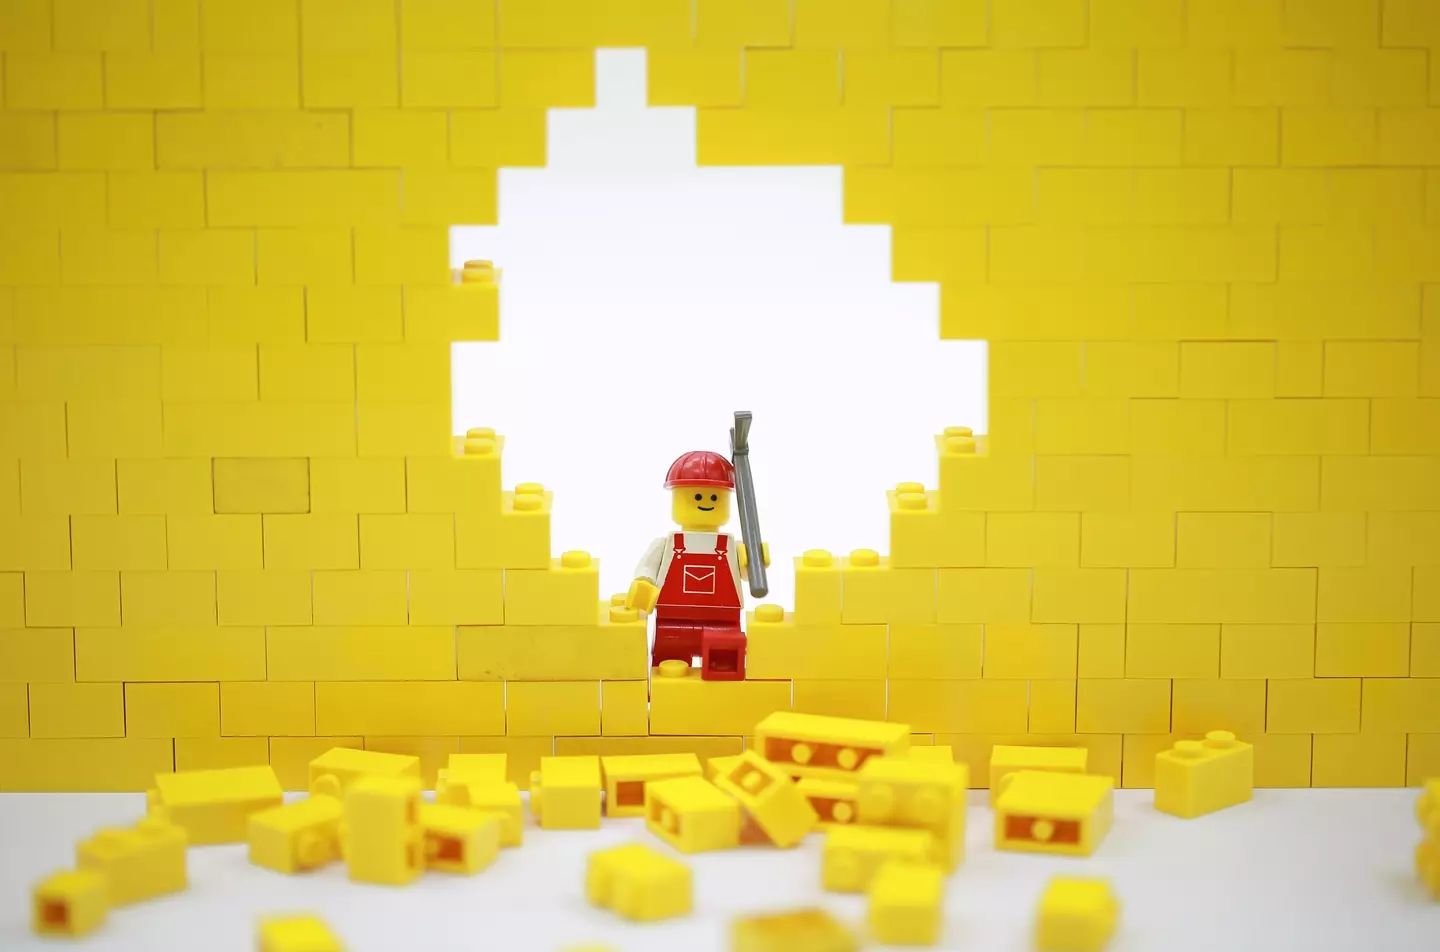 The strange Lego theory has made people rethink how their houses are built.